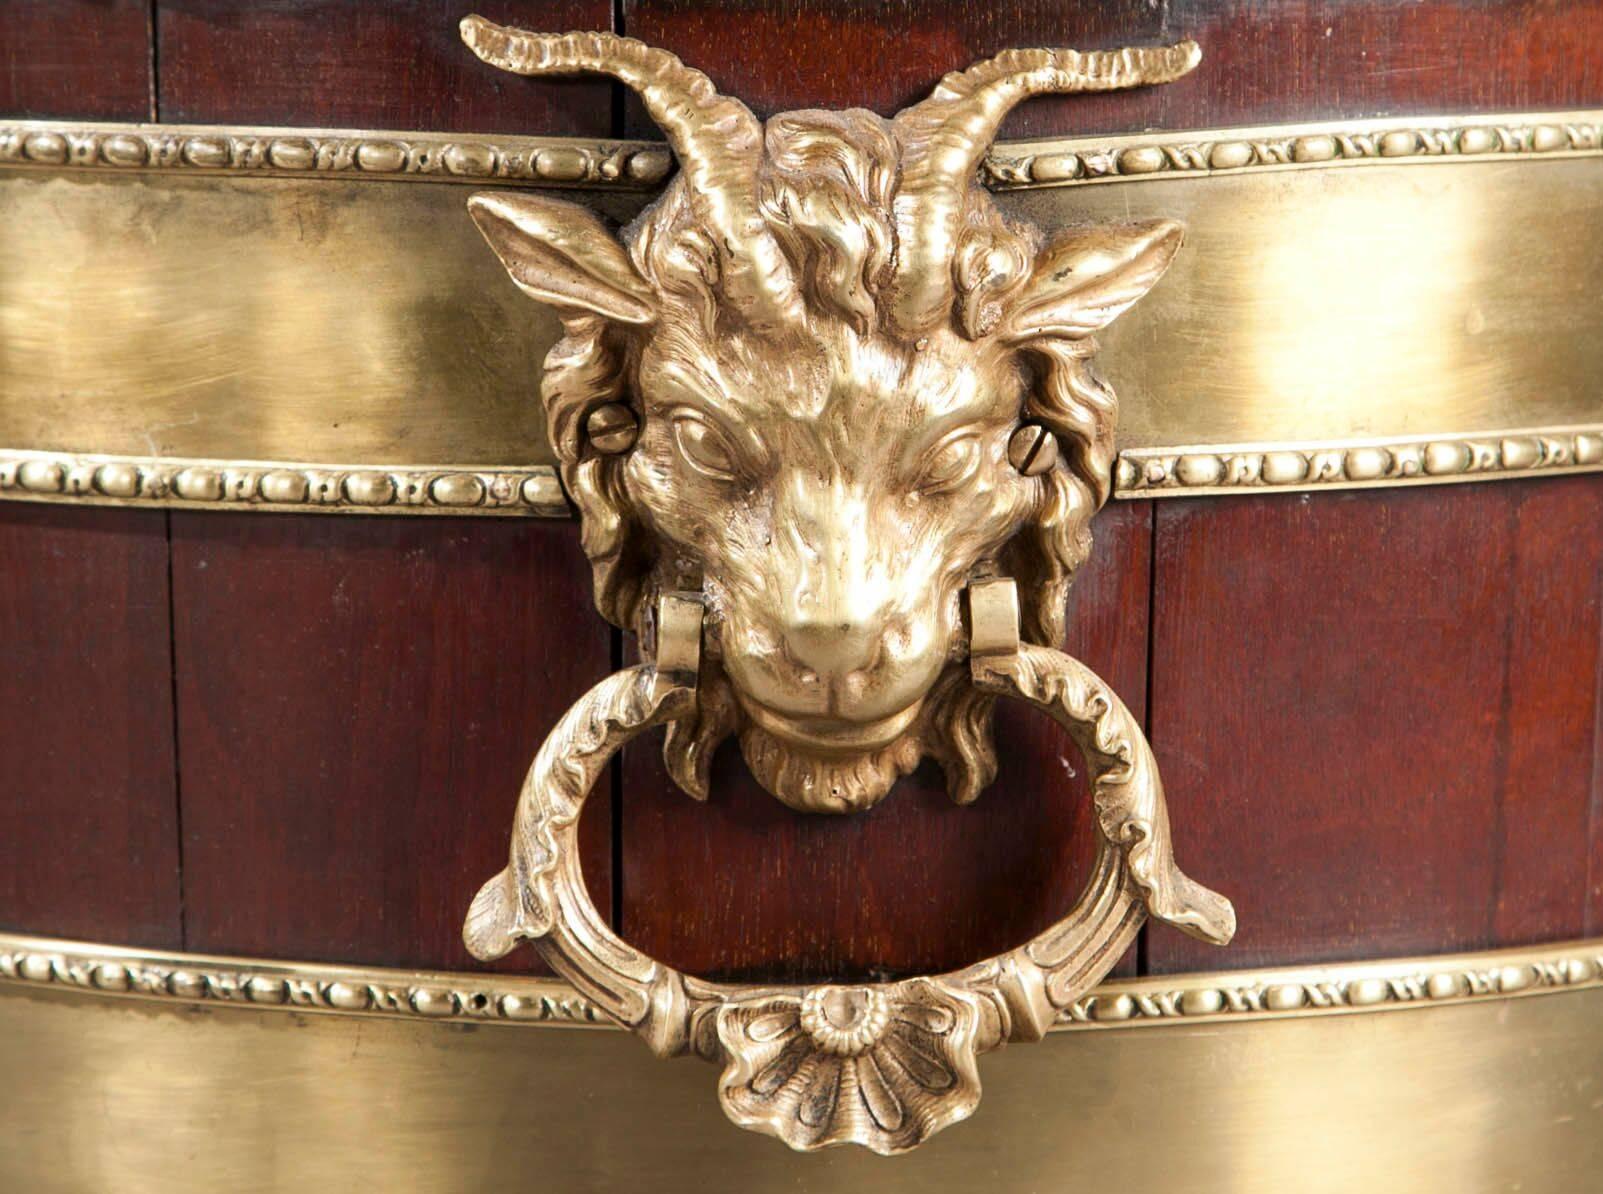 A George III style mahogany, ormolu-mounted oval wine cooler on stand. The oval cooler with a Gadrooned brass rim above two brass bands with ram's head carrying handles, resting on an ormolu-mounted base with Bacchus face flanked by vines on each